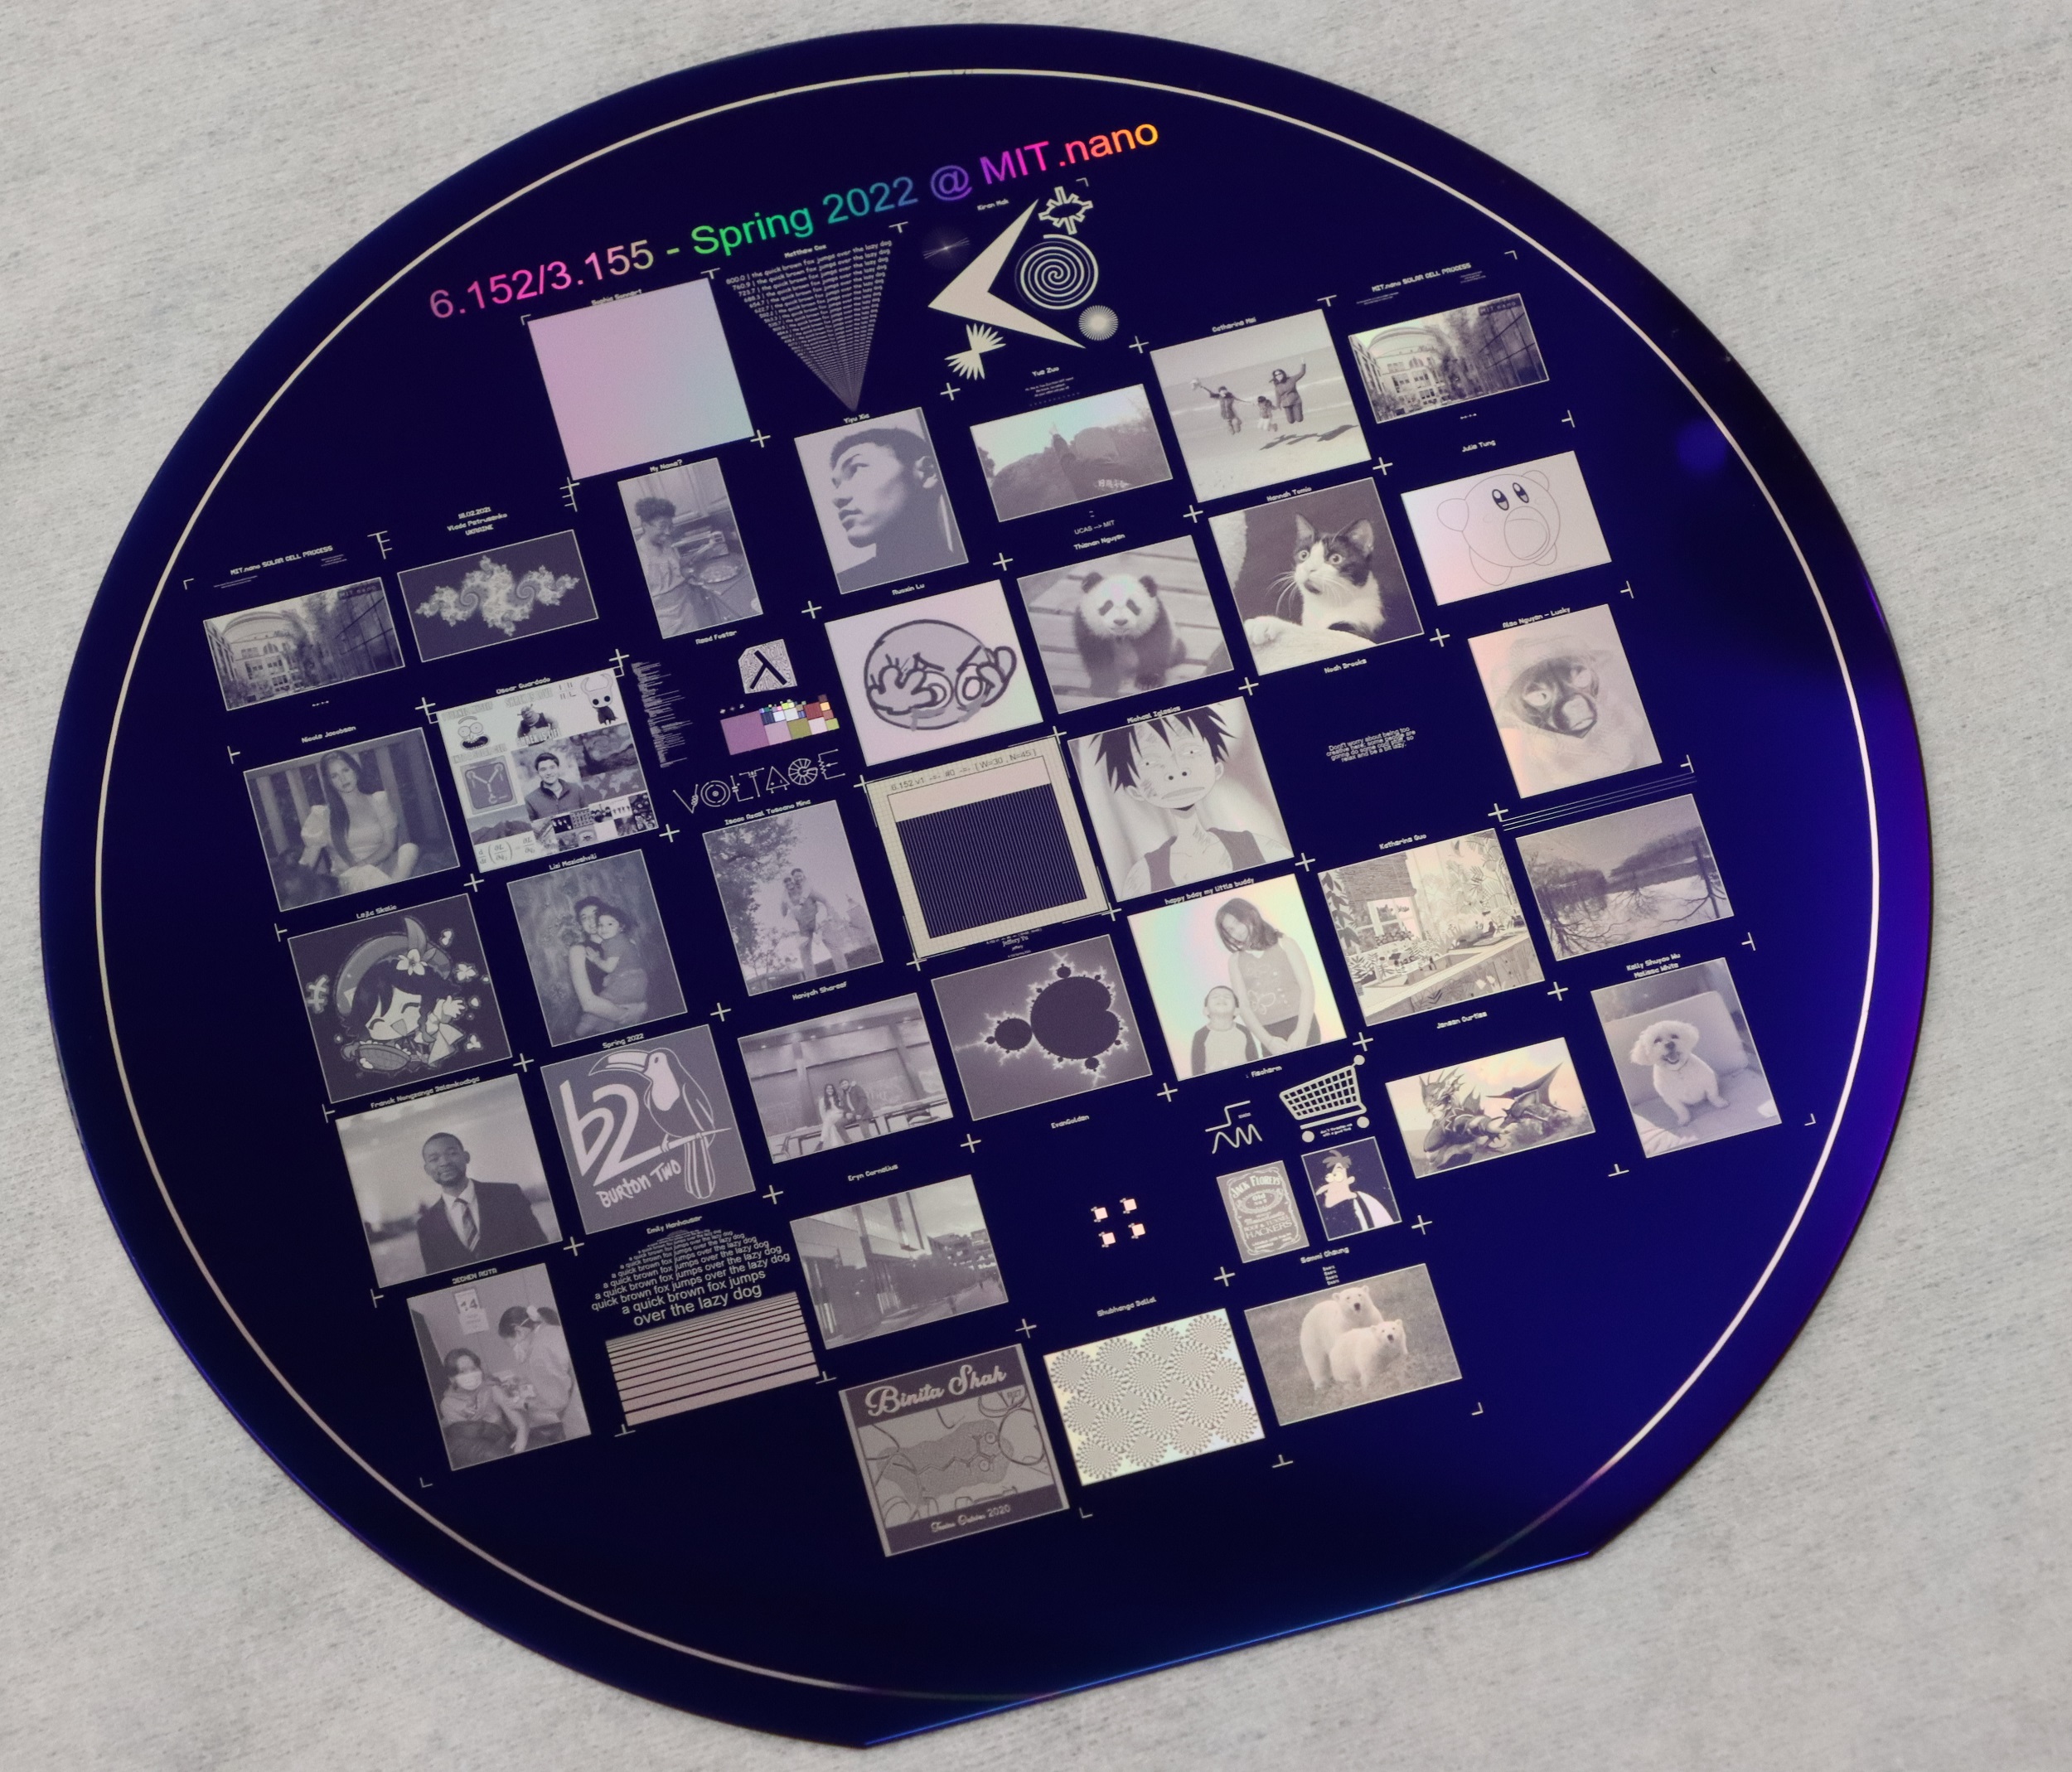 A completed wafer with an etched image.